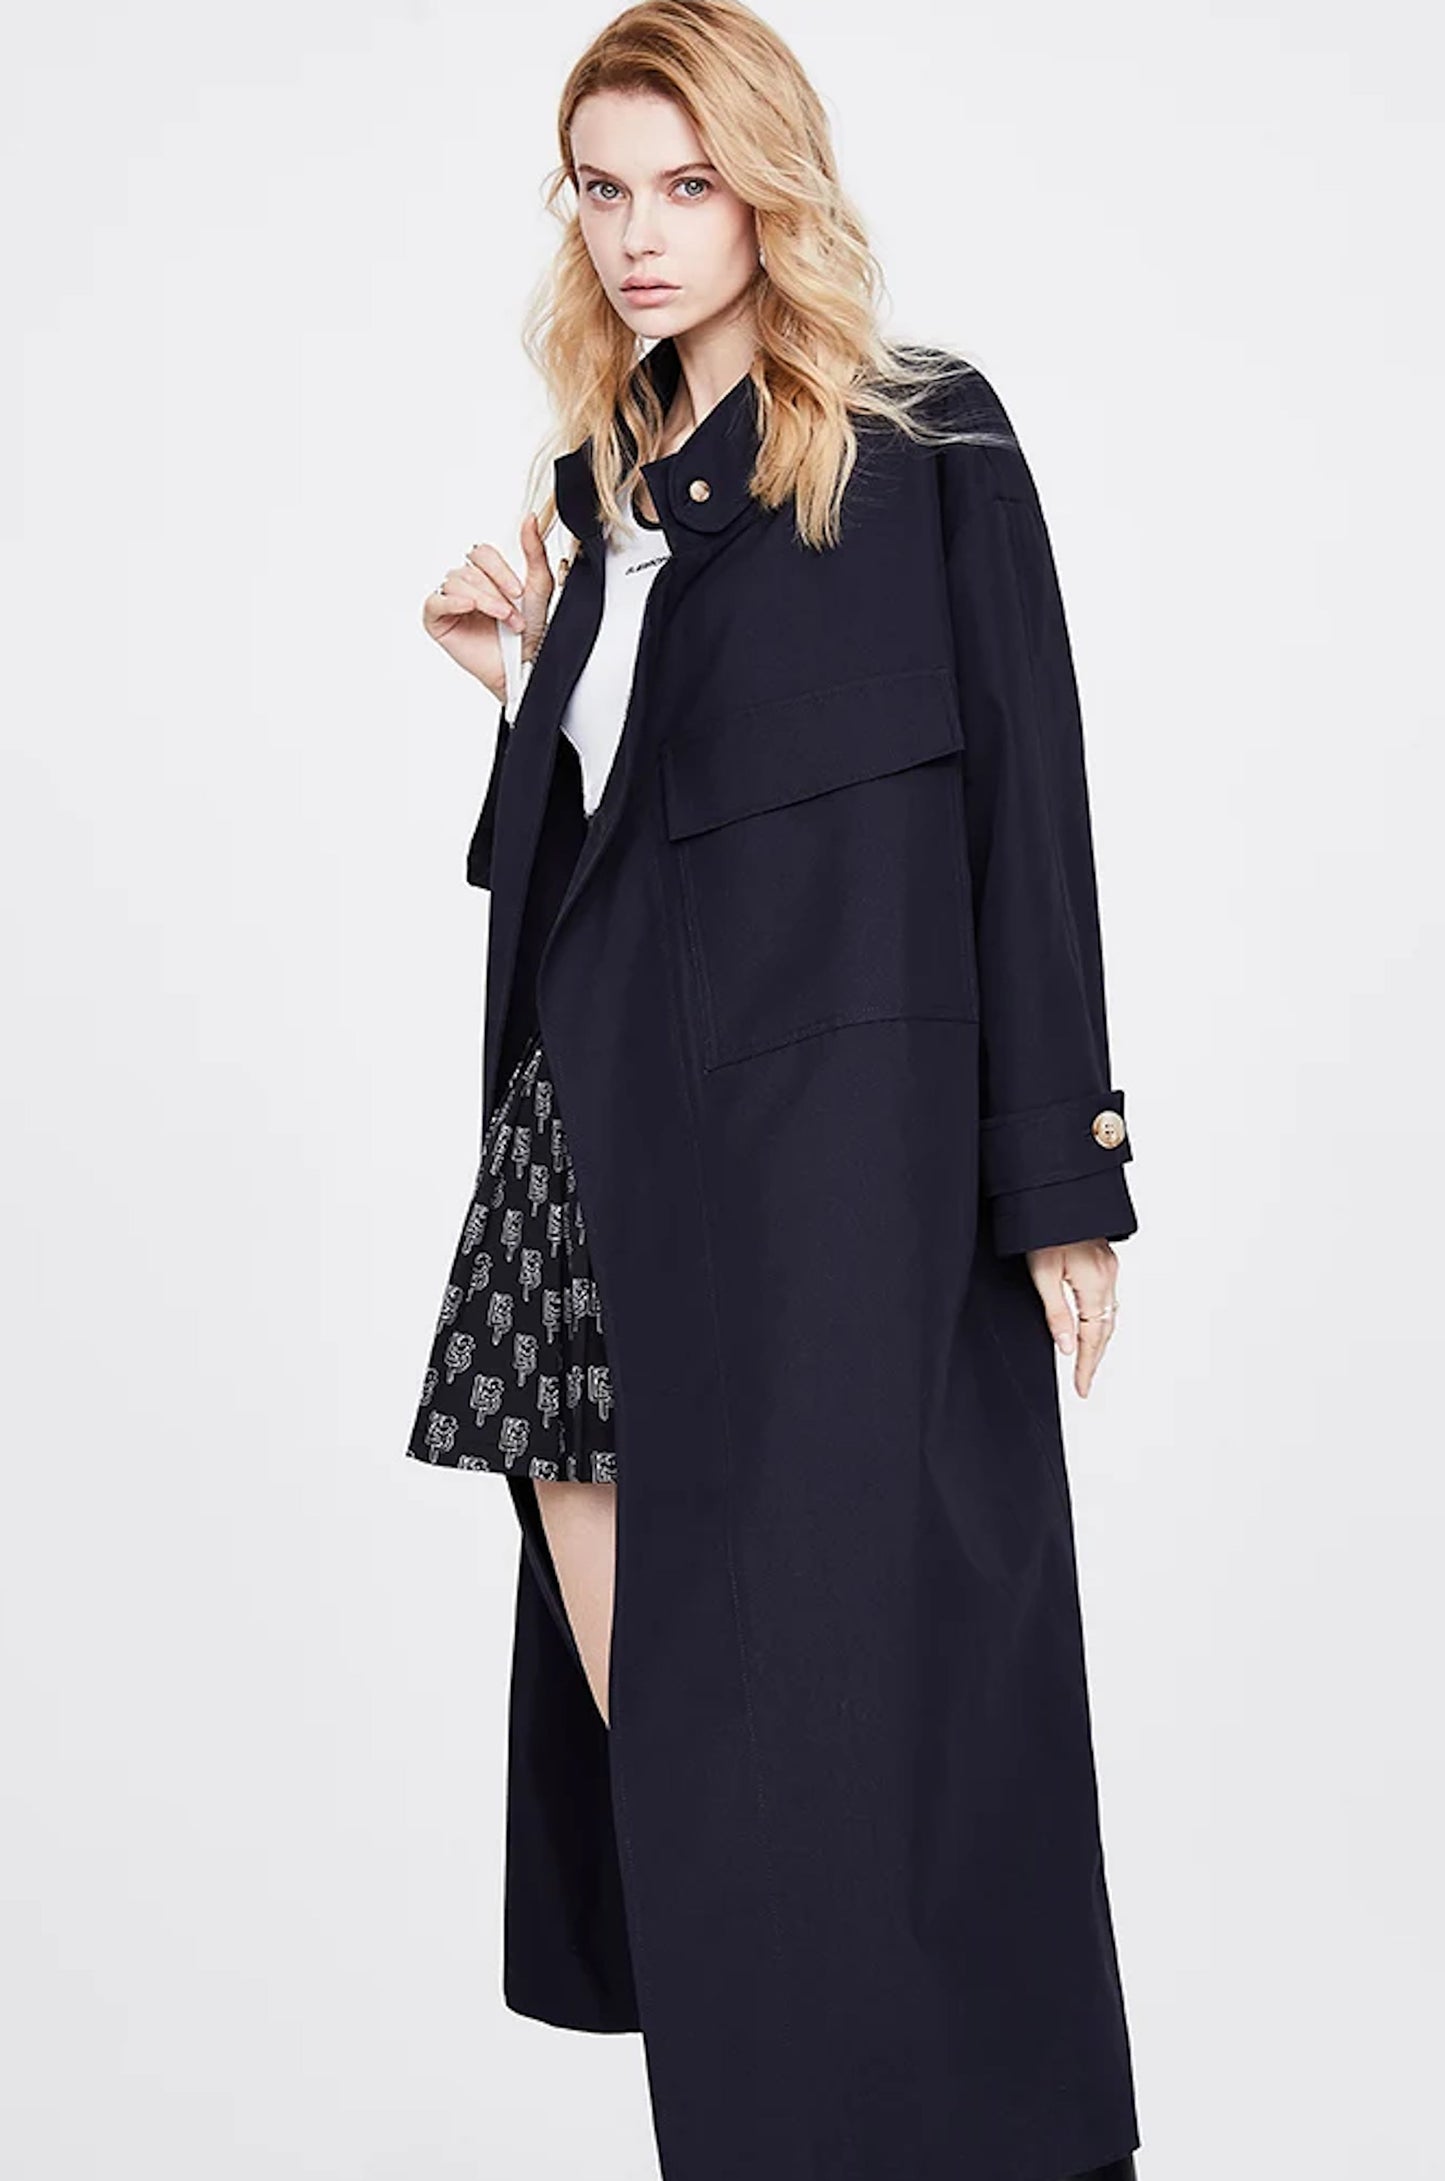 Casual Trench Coat, Street Oversized Jackets Outerwear